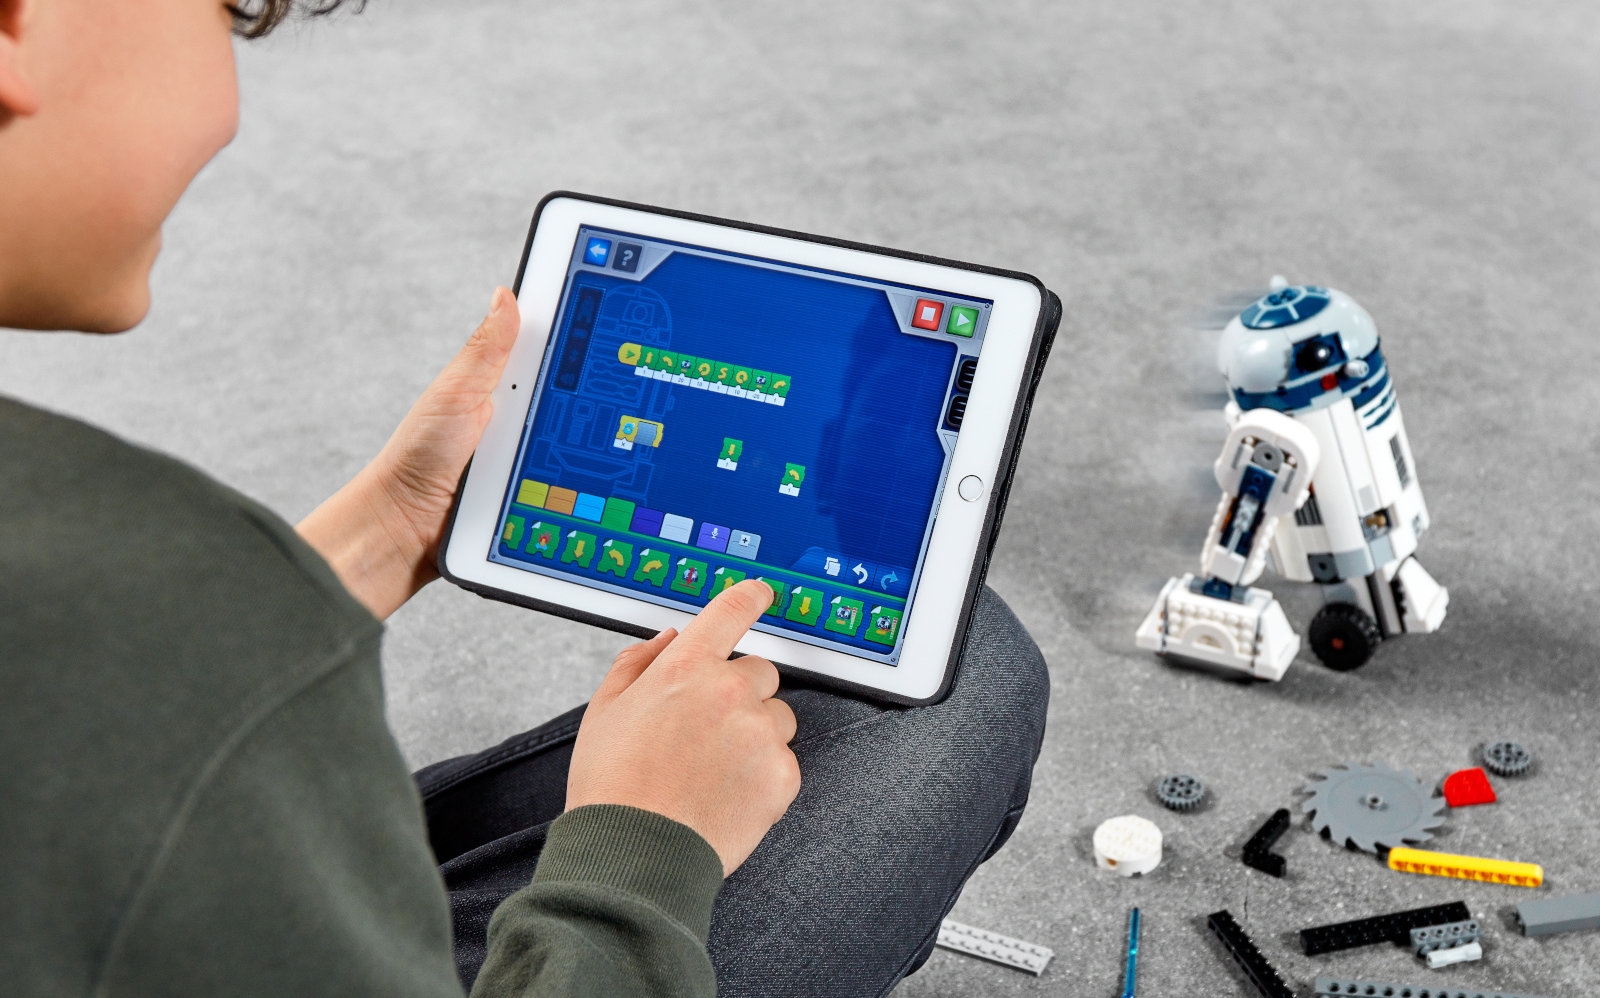 Lego 'Star Wars' droid kit teaches coding with R2-D2's help | DeviceDaily.com